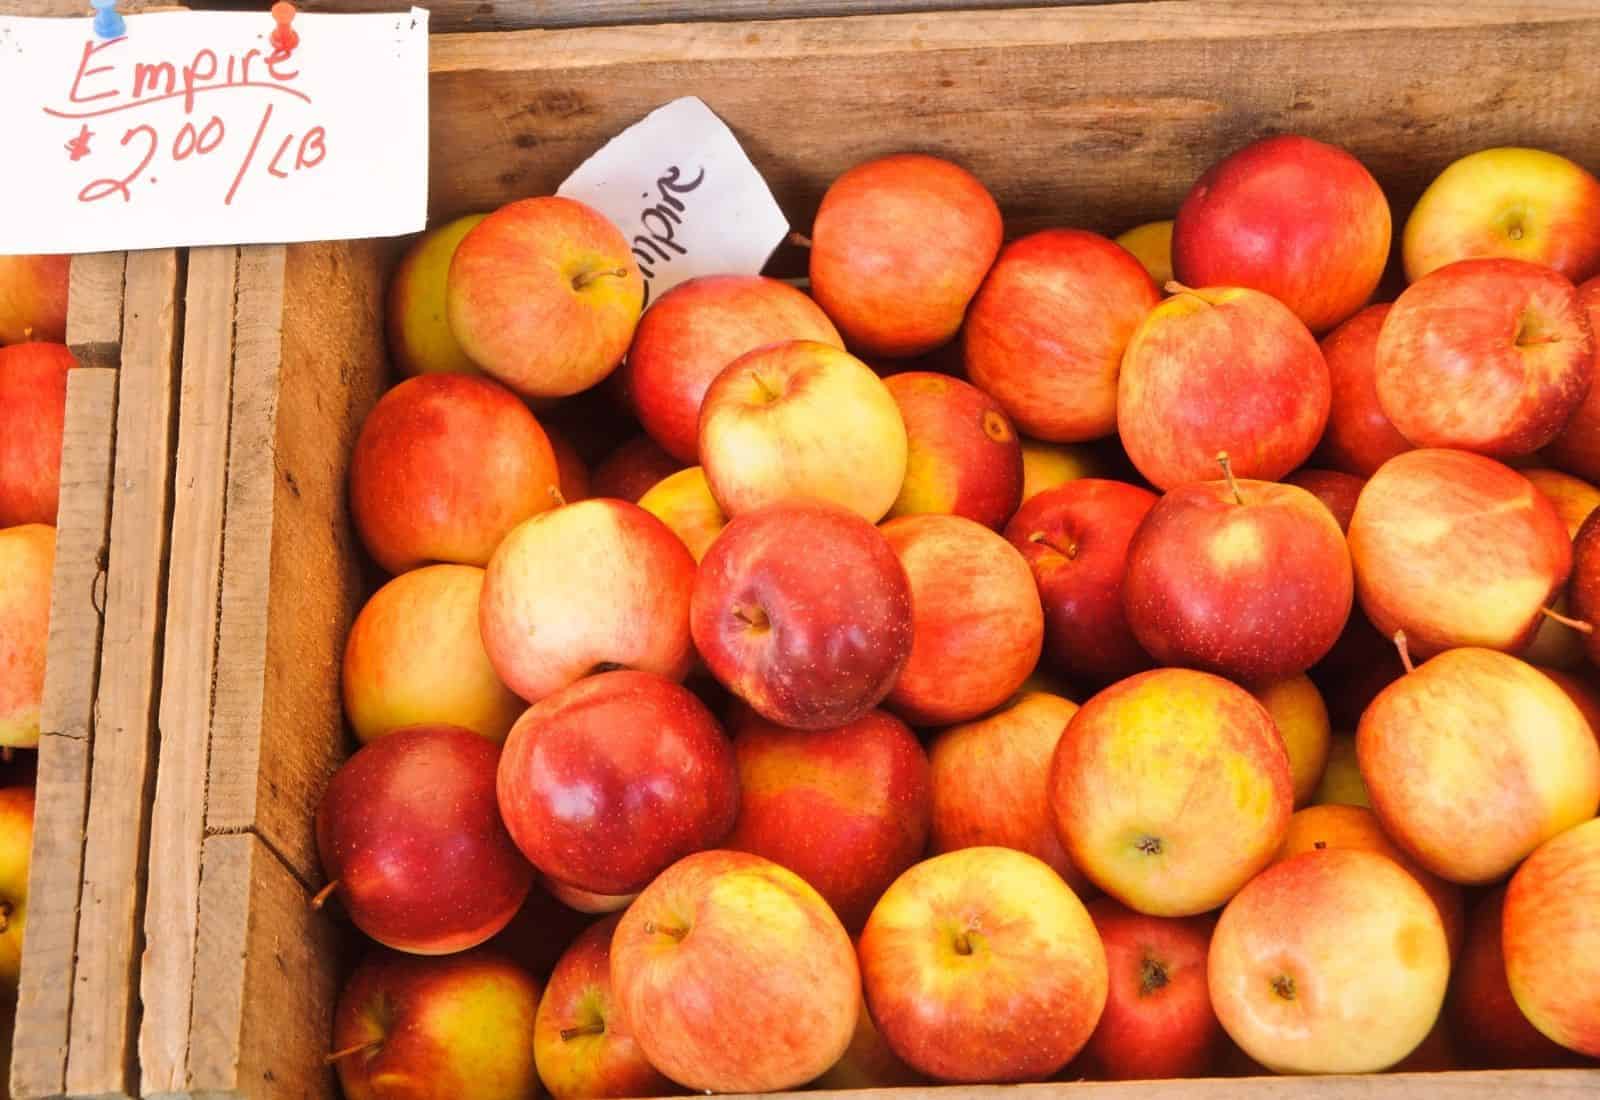 Empire apples - cost at the market